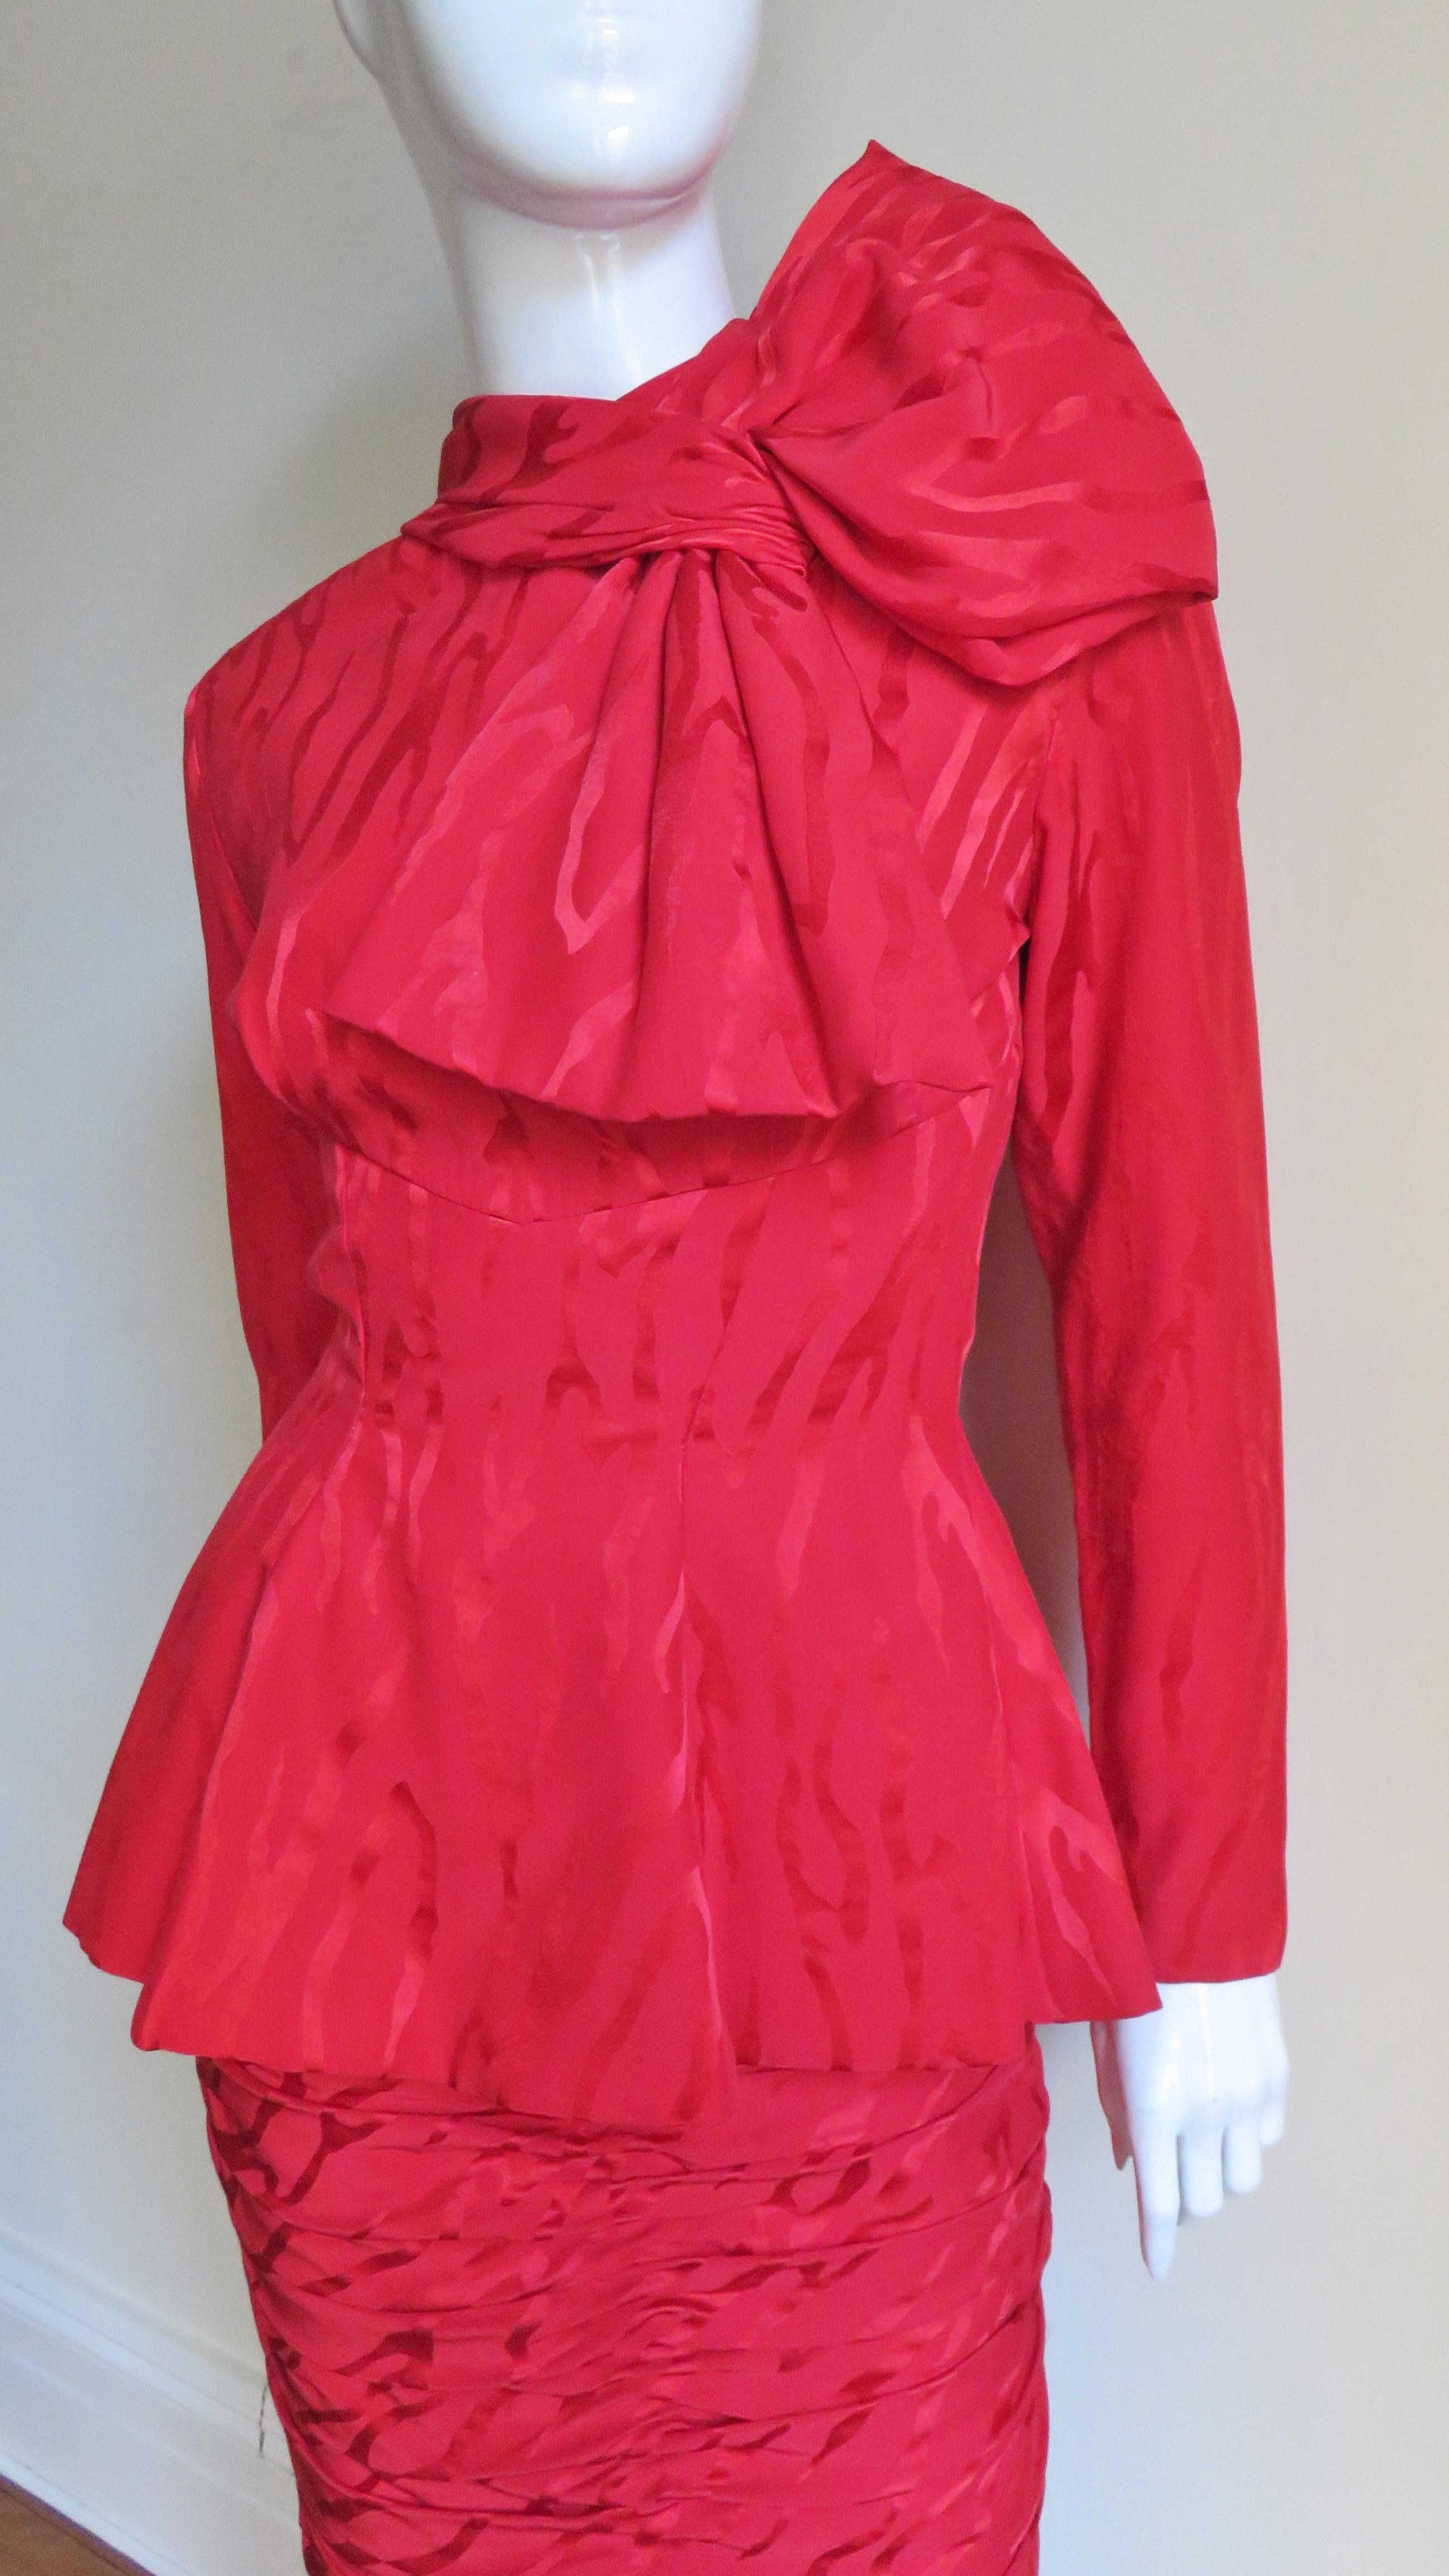 A beautiful red silk damask 2 piece skirt and top set from Vicky Tiel's couture collection. The long sleeve top is fitted at the waist with an inset at the front and back to above the waist then flaring towards the hip length hem. There is a large